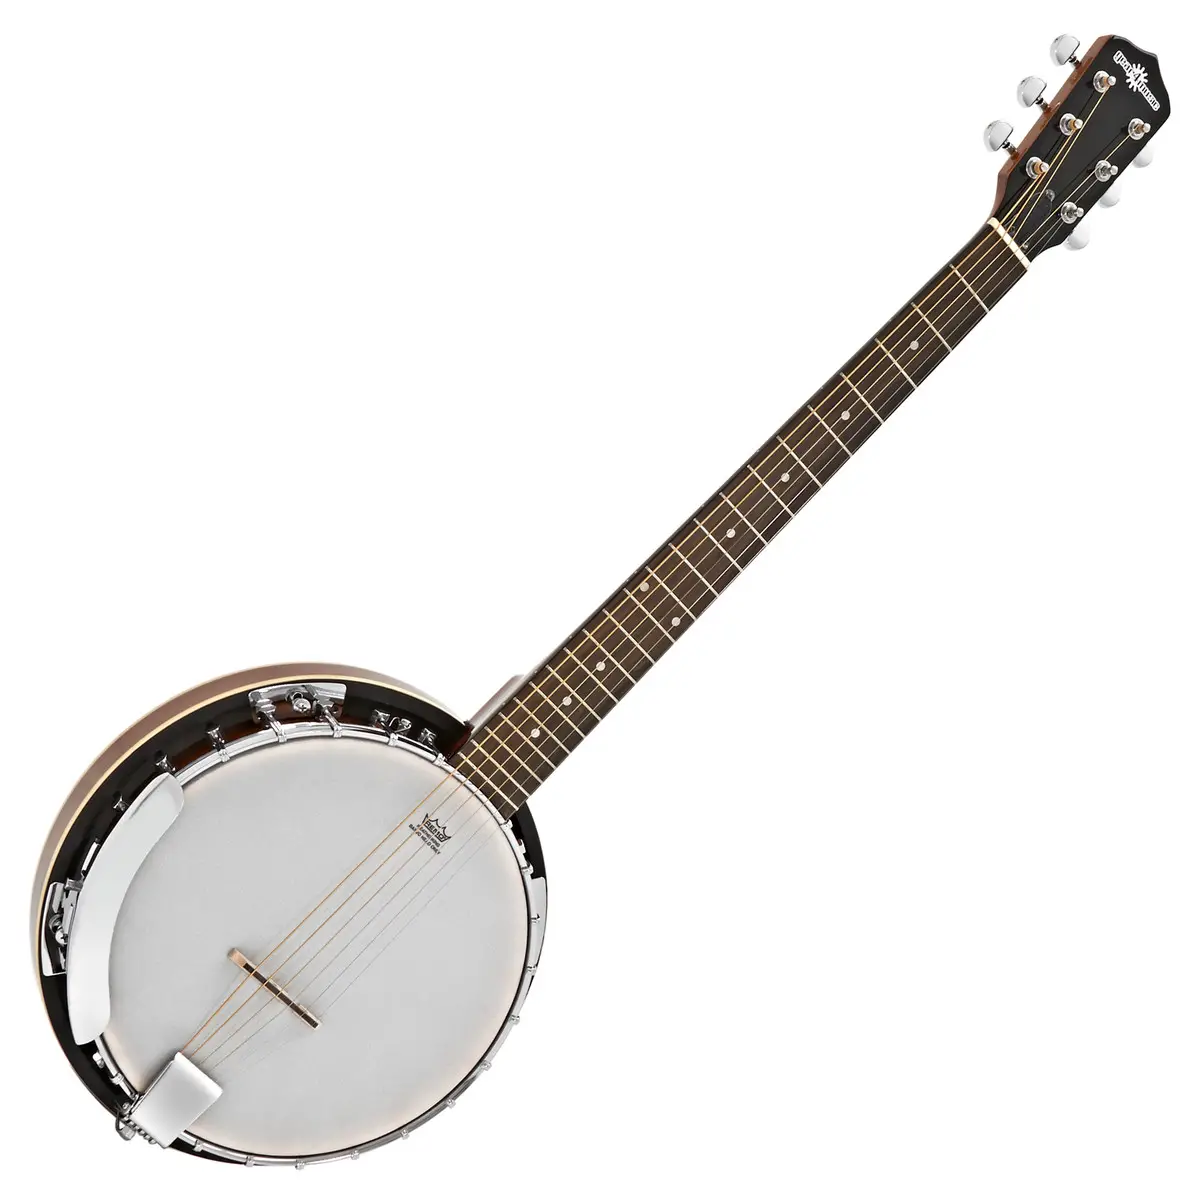 Tips For Tuning A Banjo